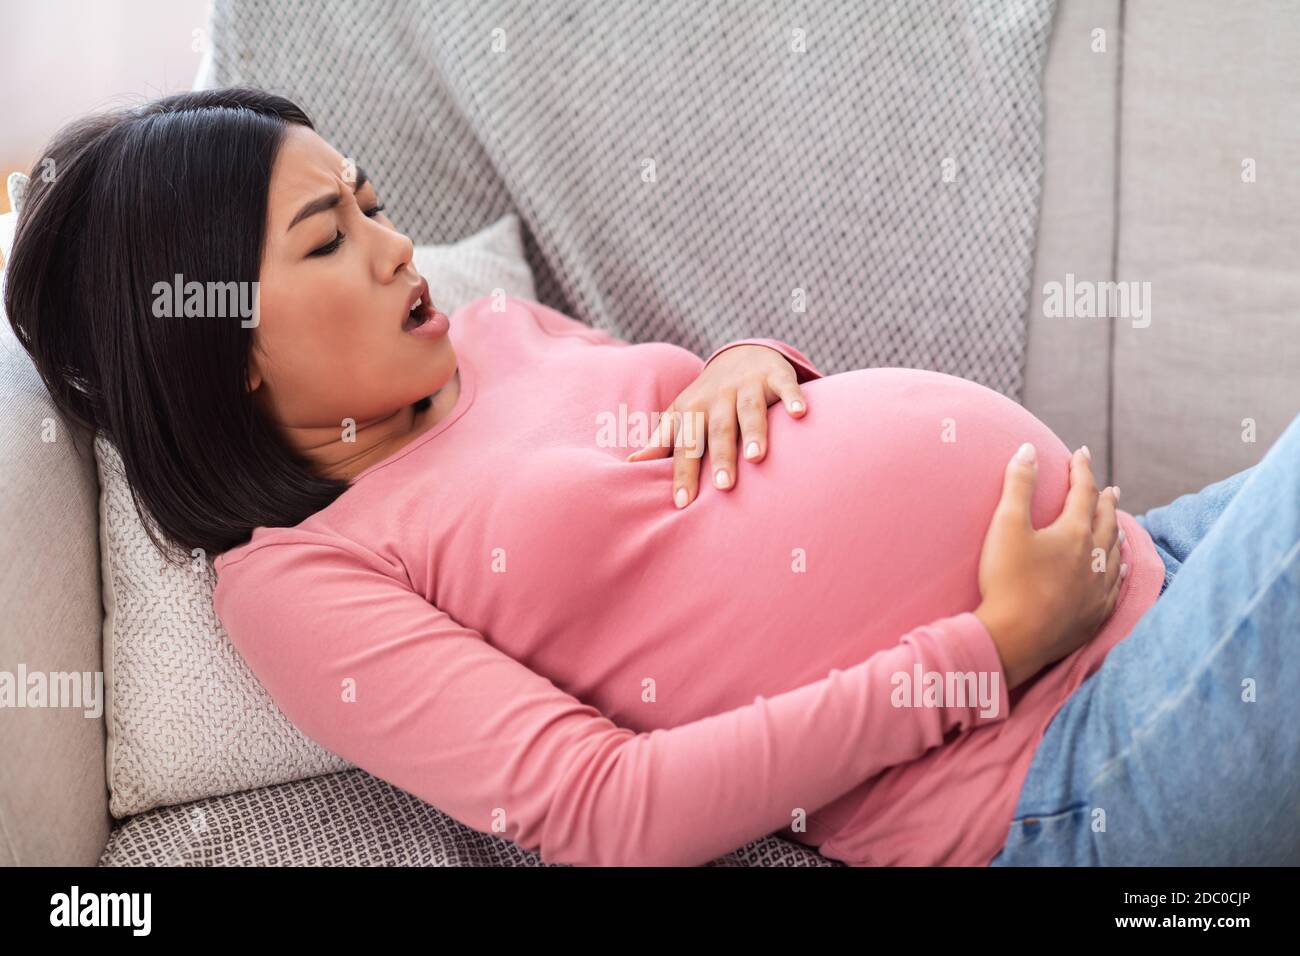 Pregnant Asian Woman Touching Belly Having Painful Contractions At Home Stock Photo